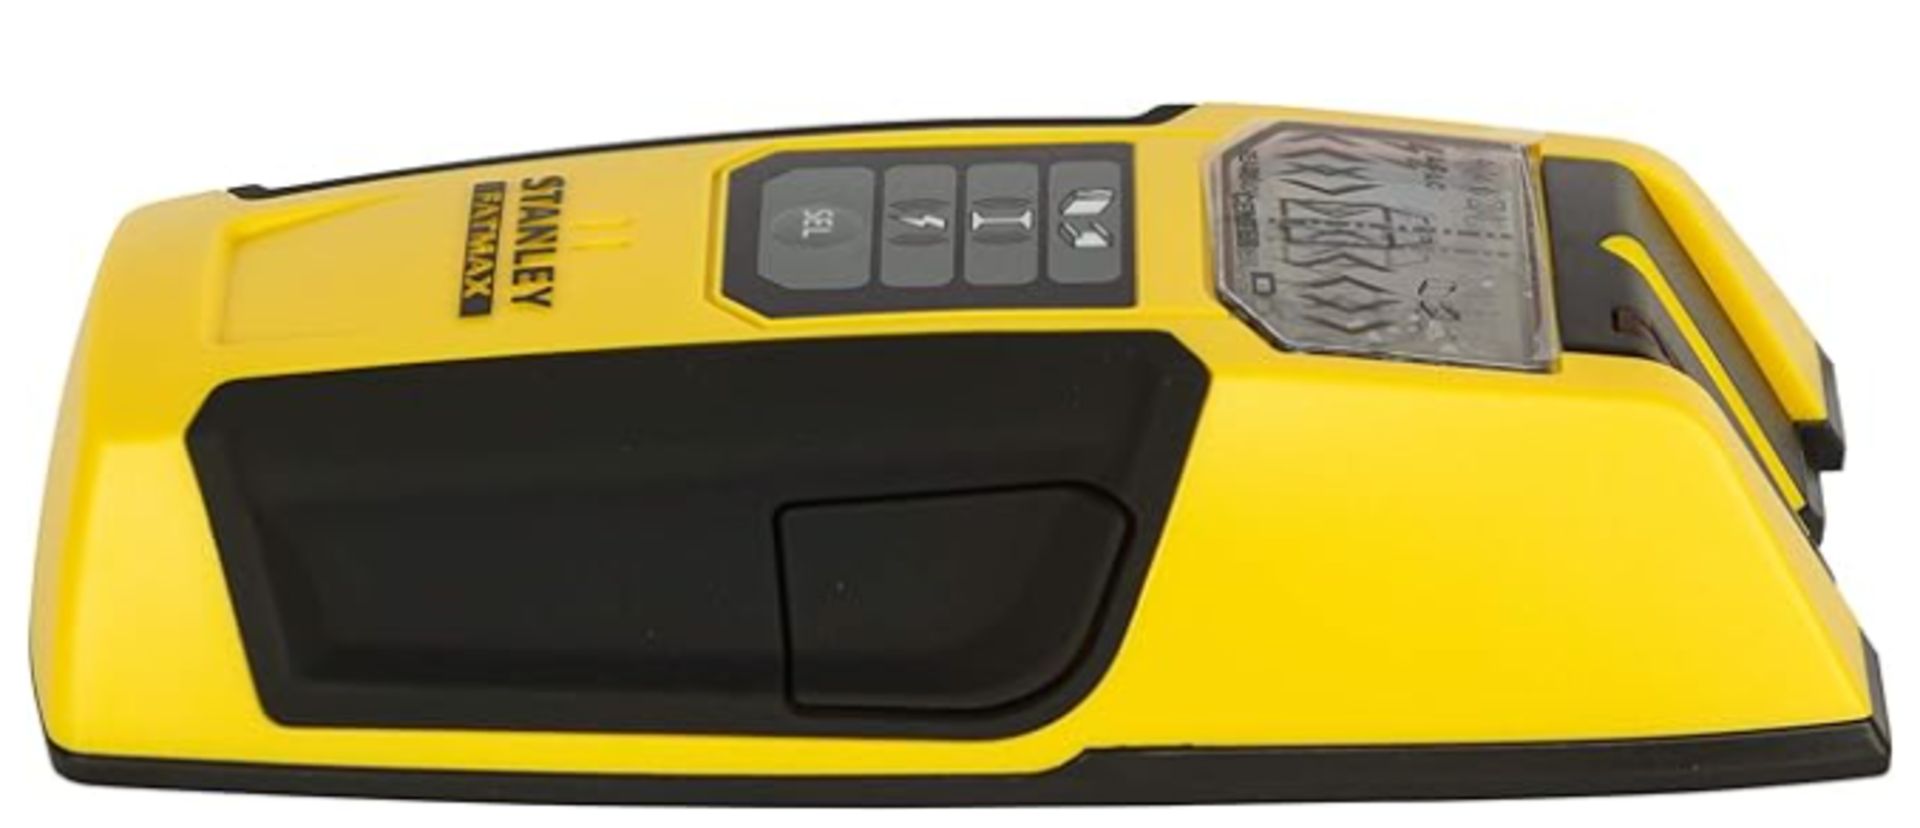 Stanley® Fatmax® Stud Finder S300 Brand New In Sealed Box RRP £45 - Image 4 of 5